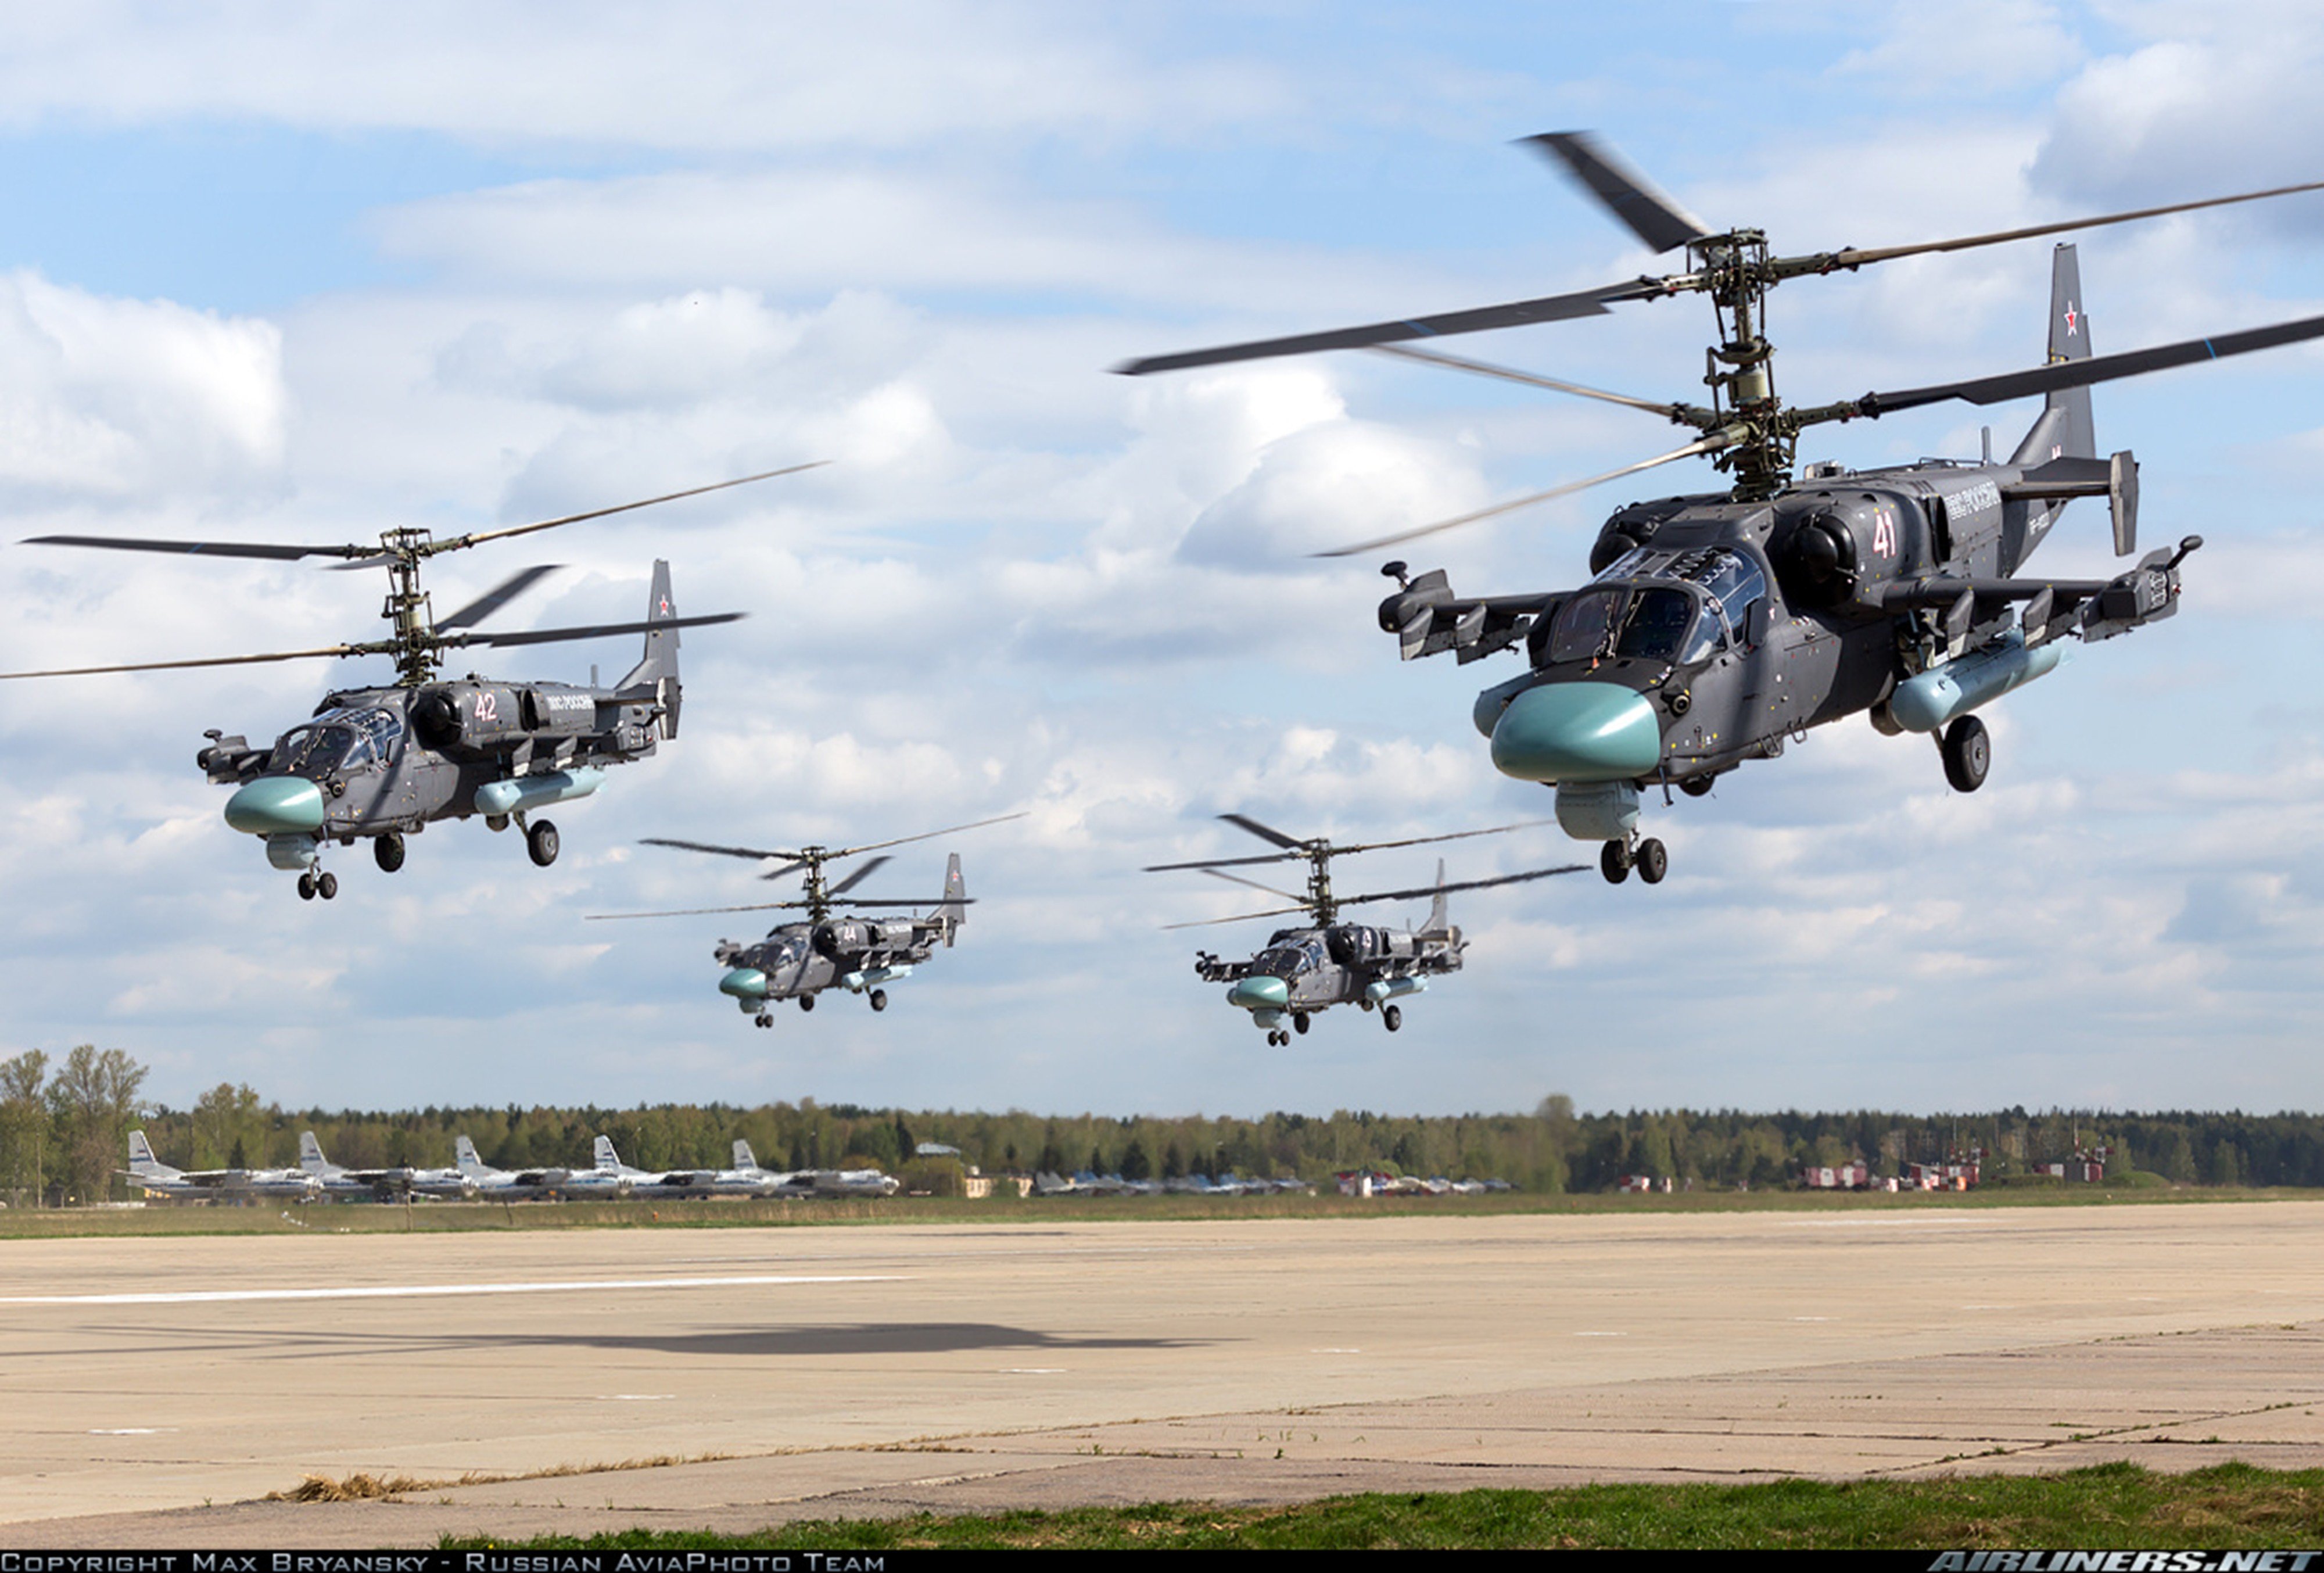 russian, Red, Star, Russia, Helicopter, Aircraft, Attack, Military, Army, Kamov, Ka 52, Alligator, 4000x2707 Wallpaper